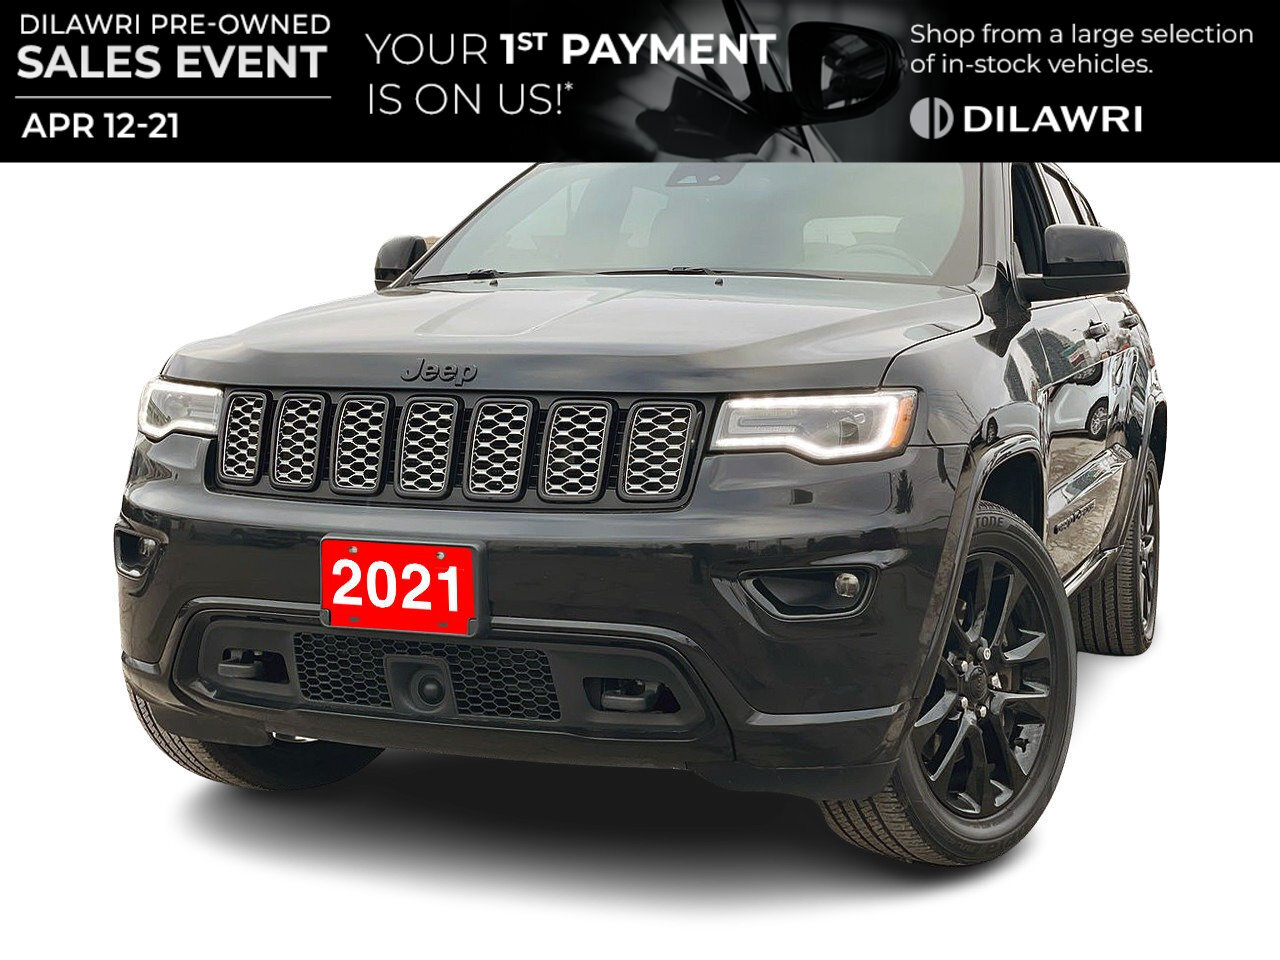 2021 Jeep Grand Cherokee Laredo 1 Owner | Clean CarFax | Blind Spot Monitor